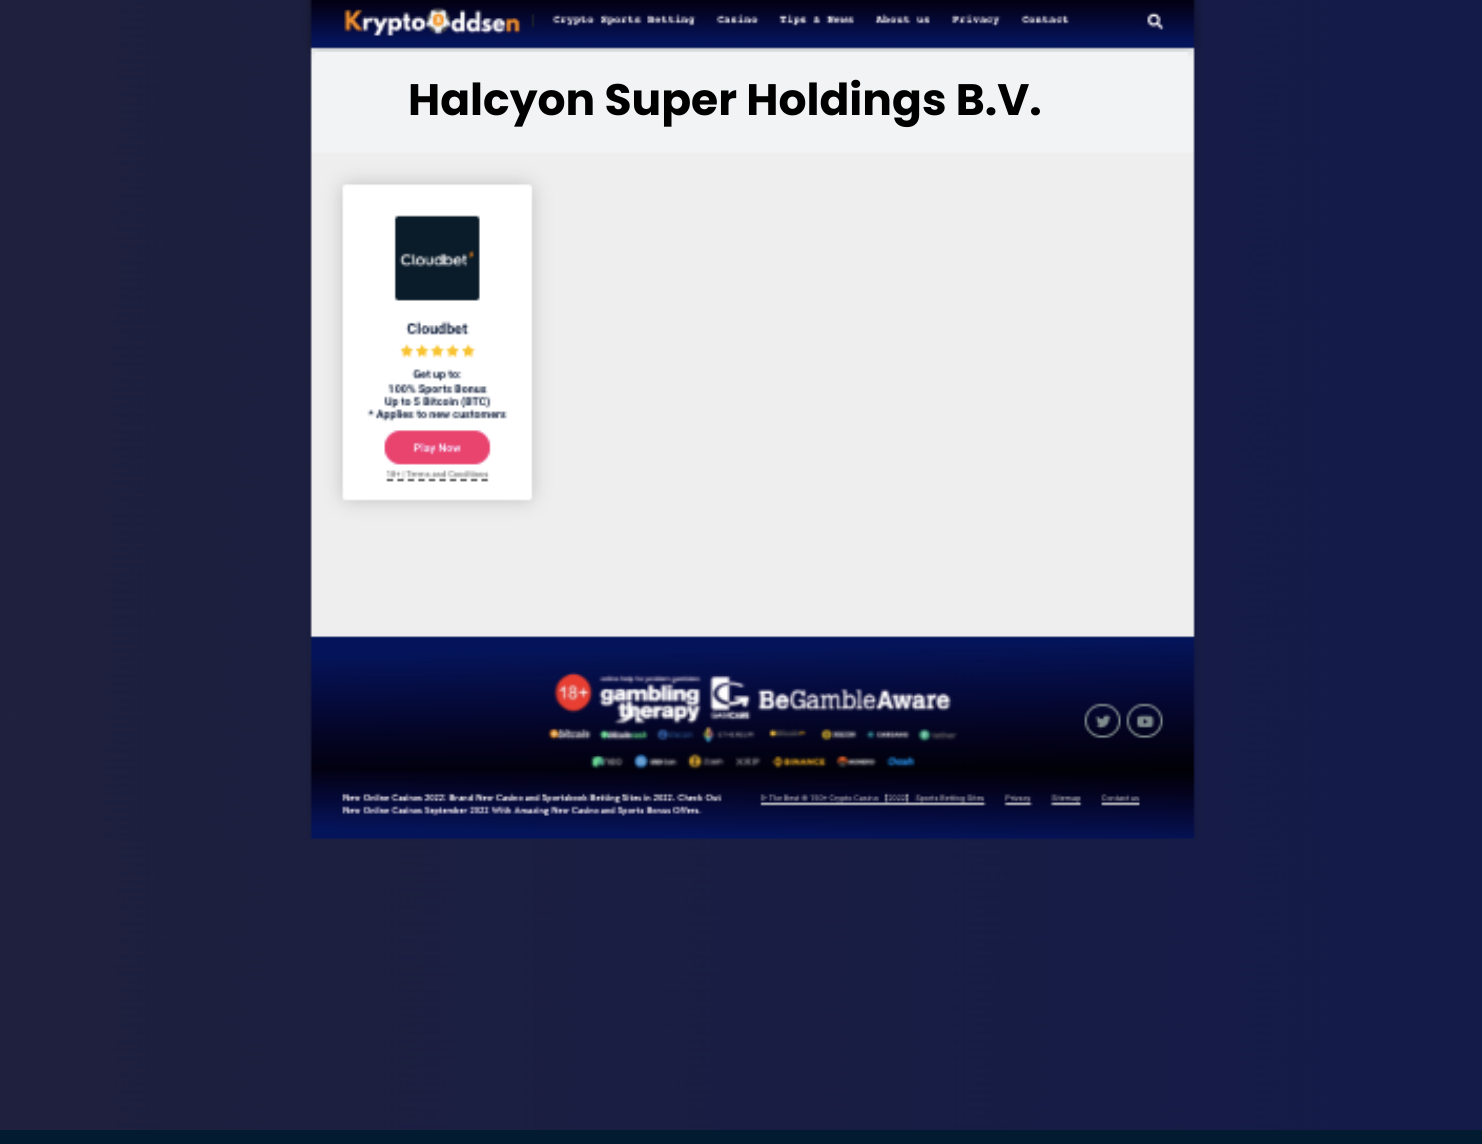 Halcyon Super Holdings B.V. Casino Owned Operated